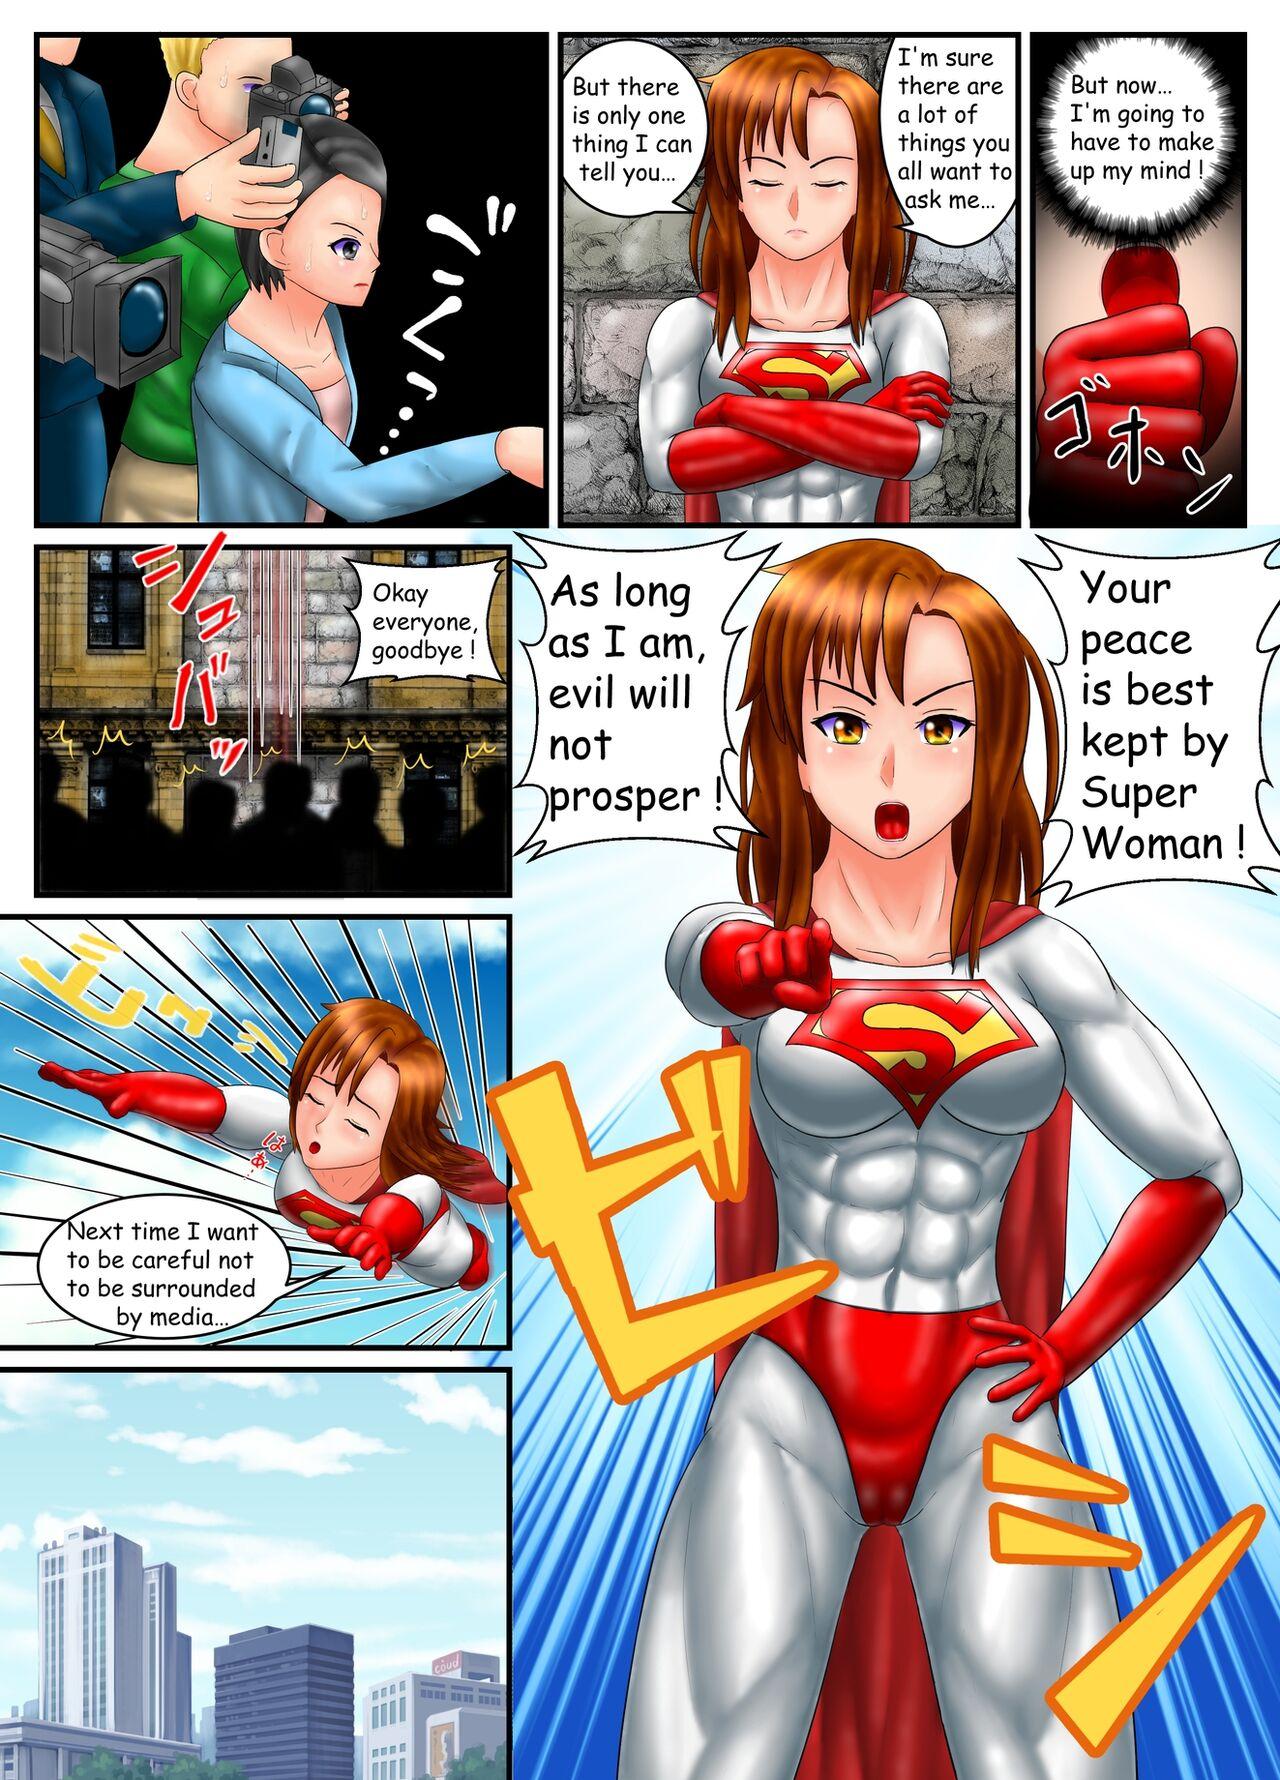 Whipping SuperWoman: The Hope Is In Her Hands - Original Amateur Porn - Page 8